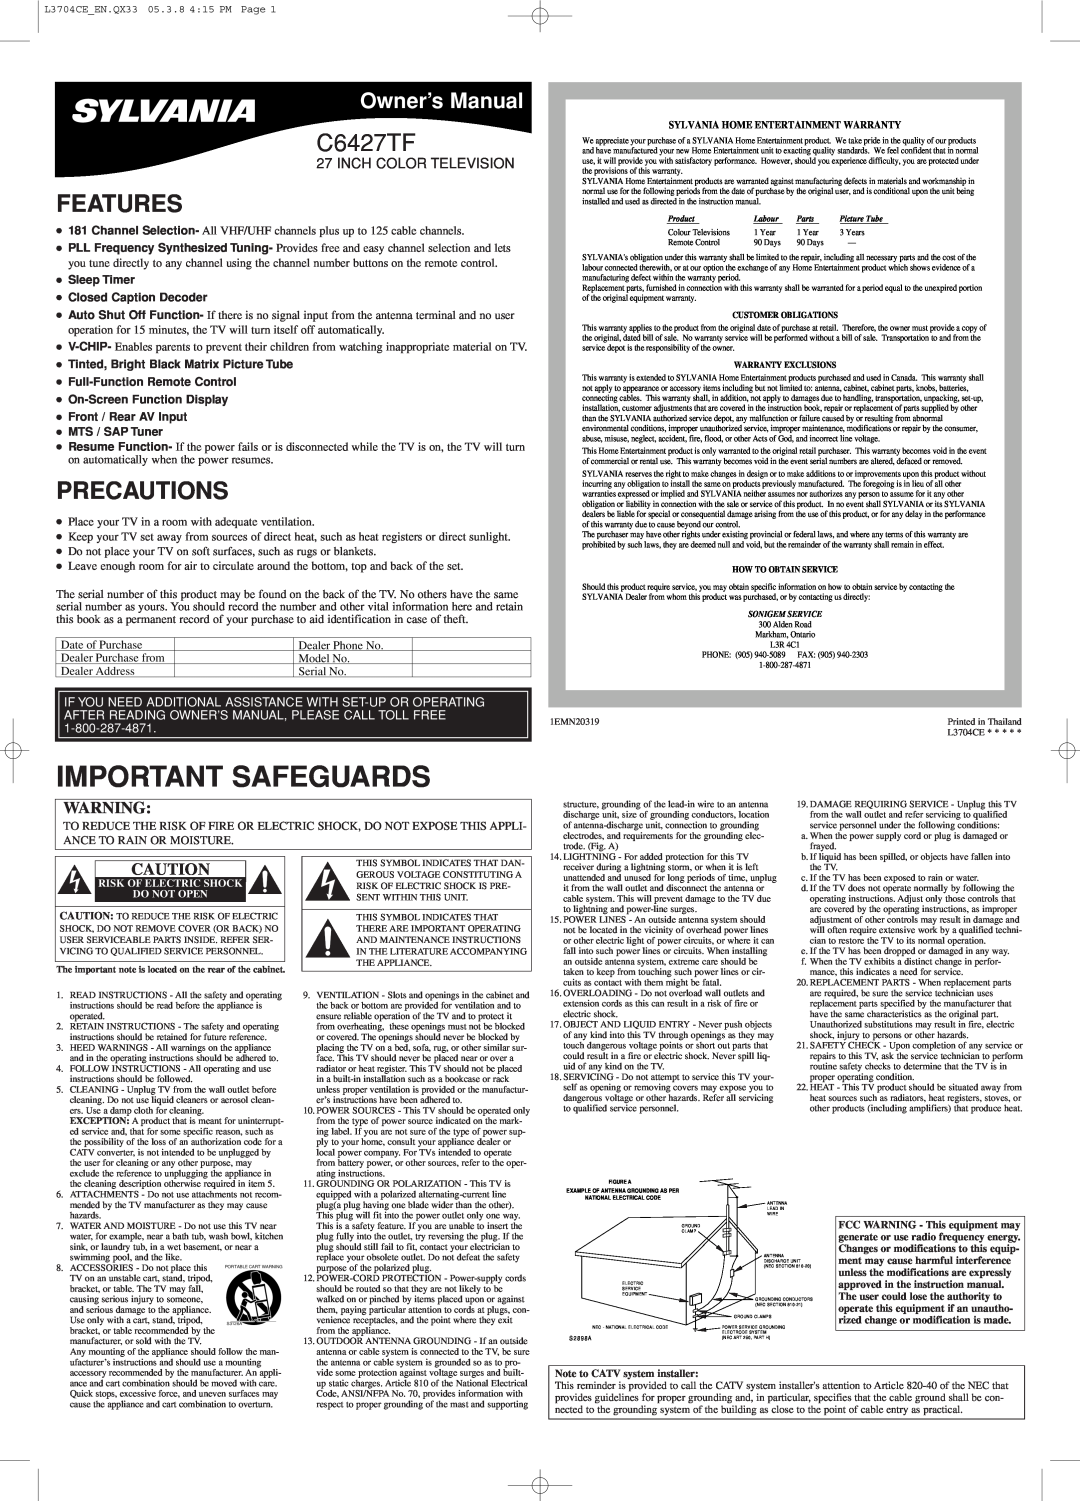 Sylvania C6427TF owner manual Important Safeguards, Features, Precautions, Owner’s Manual, Inch Color Television 